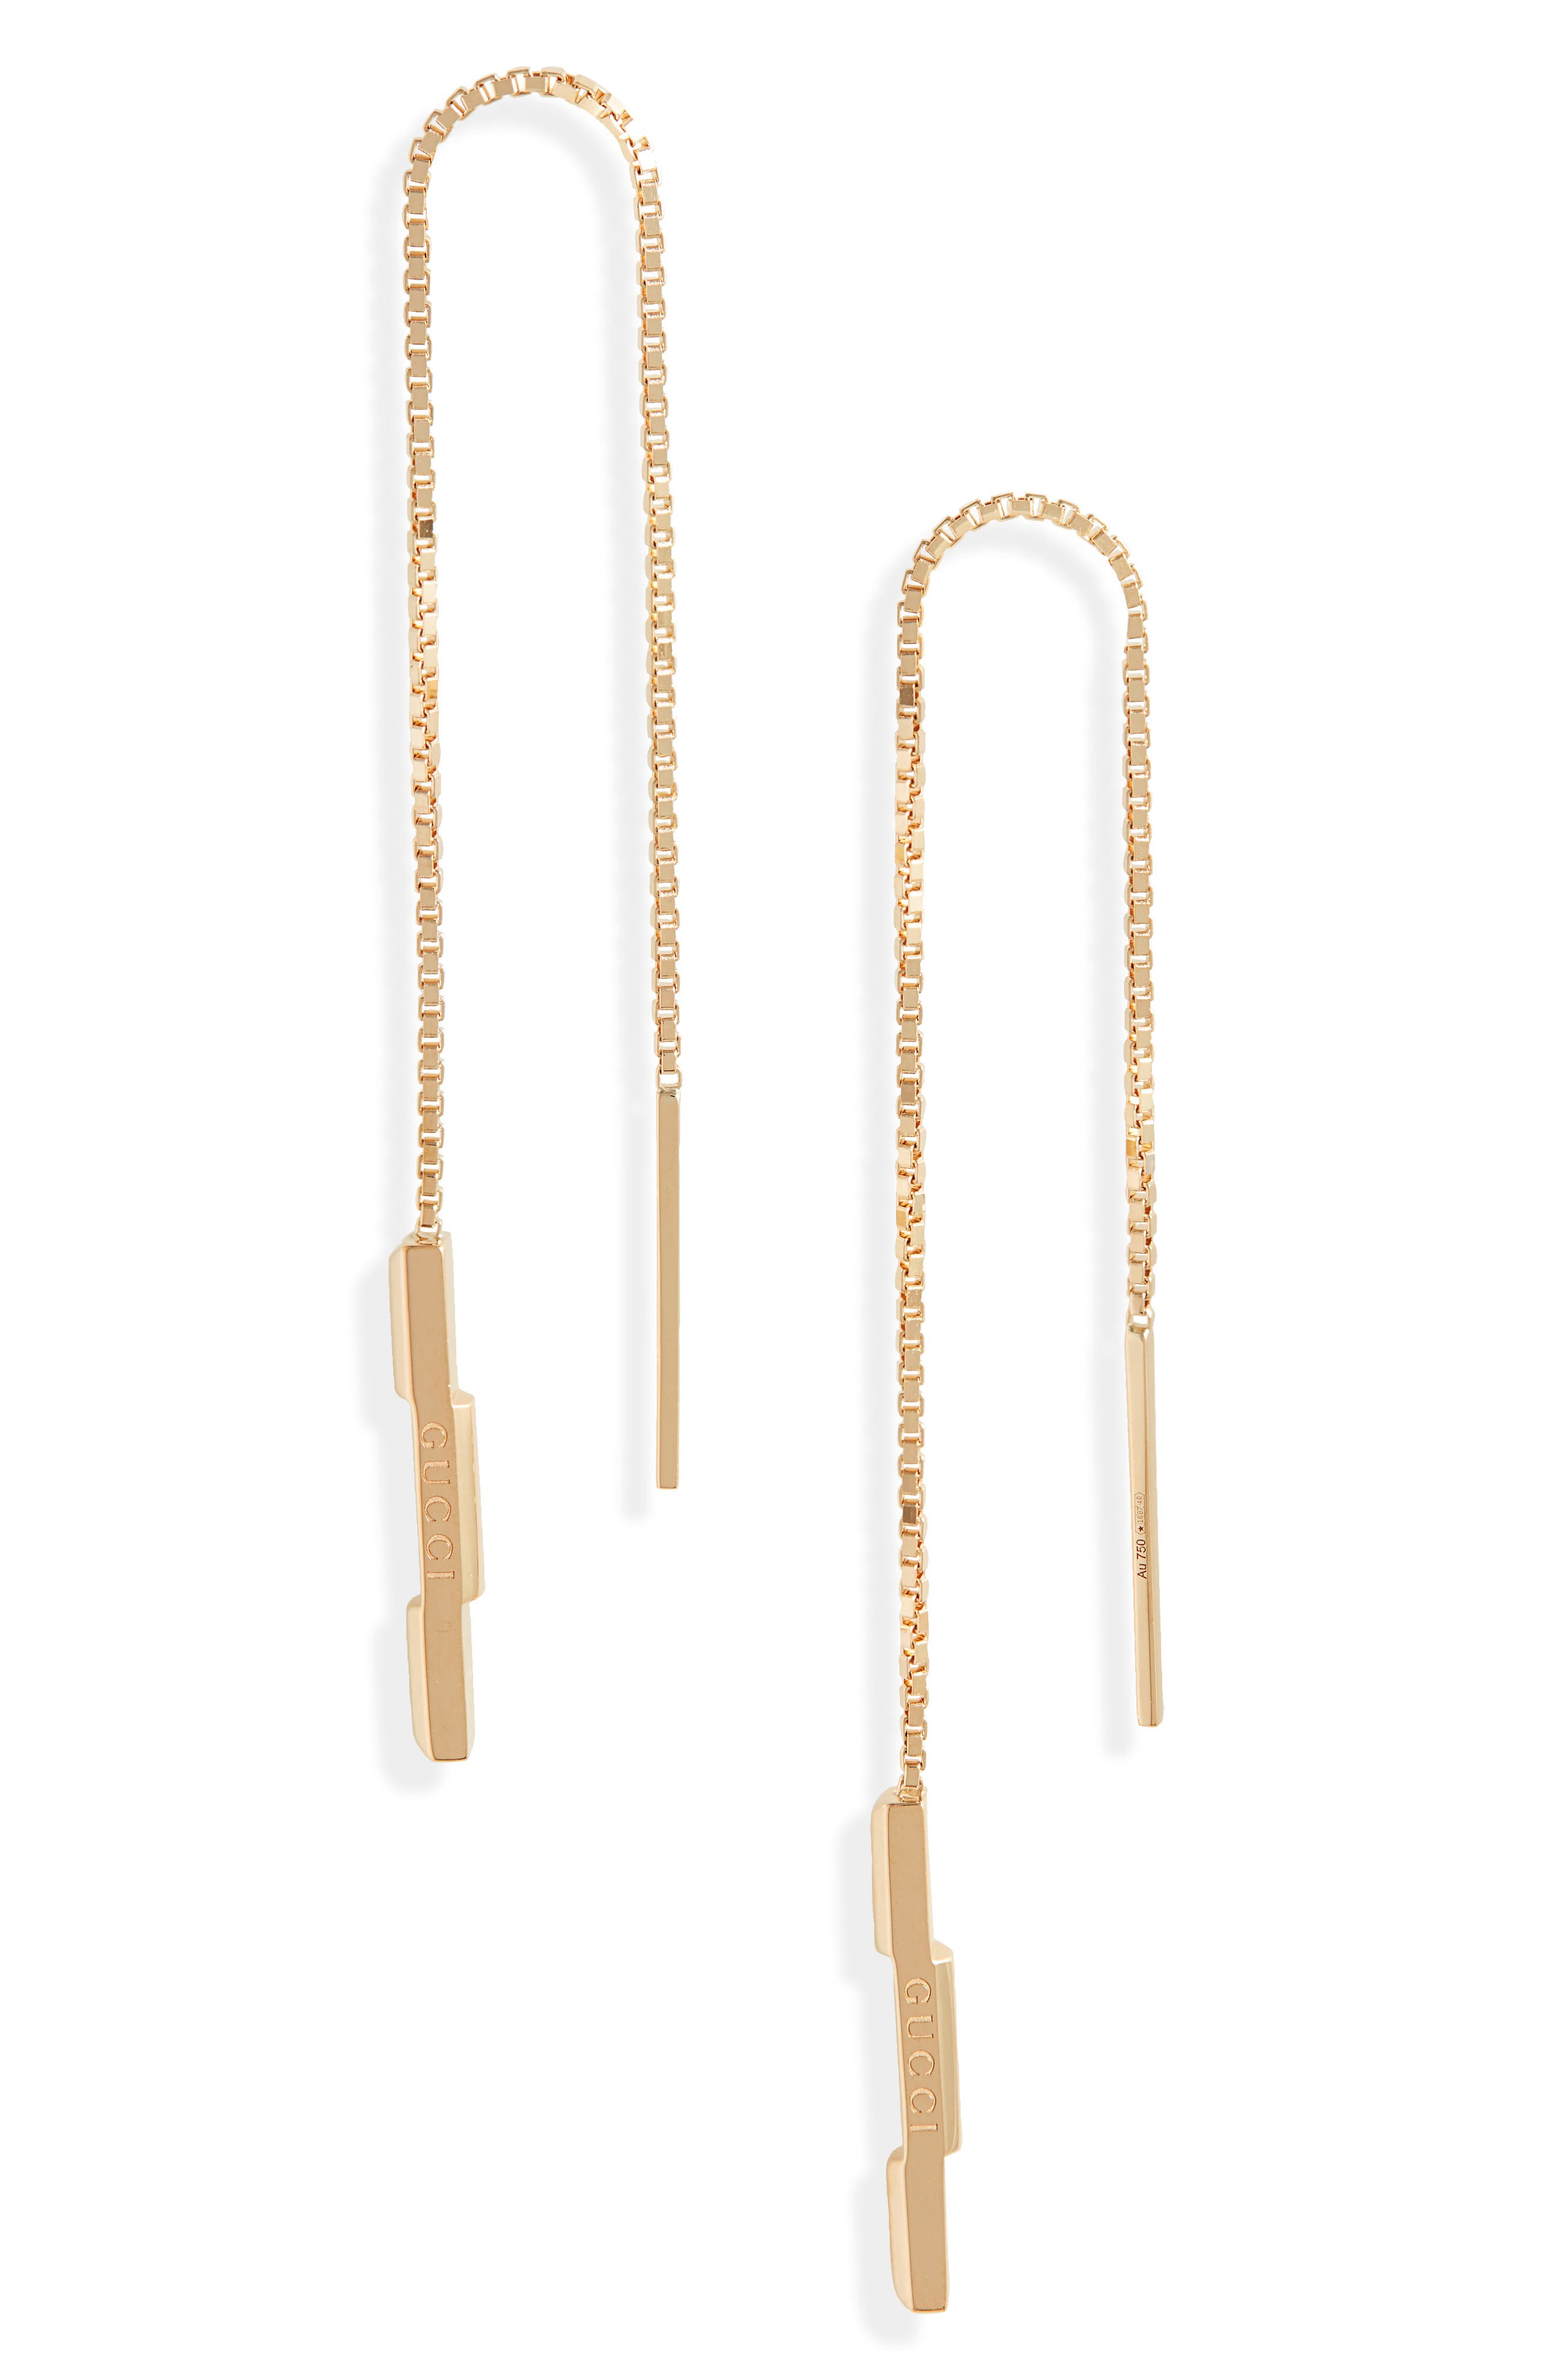 Gucci Link to Love 18K Gold Threader Earrings in Yellow Gold at Nordstrom